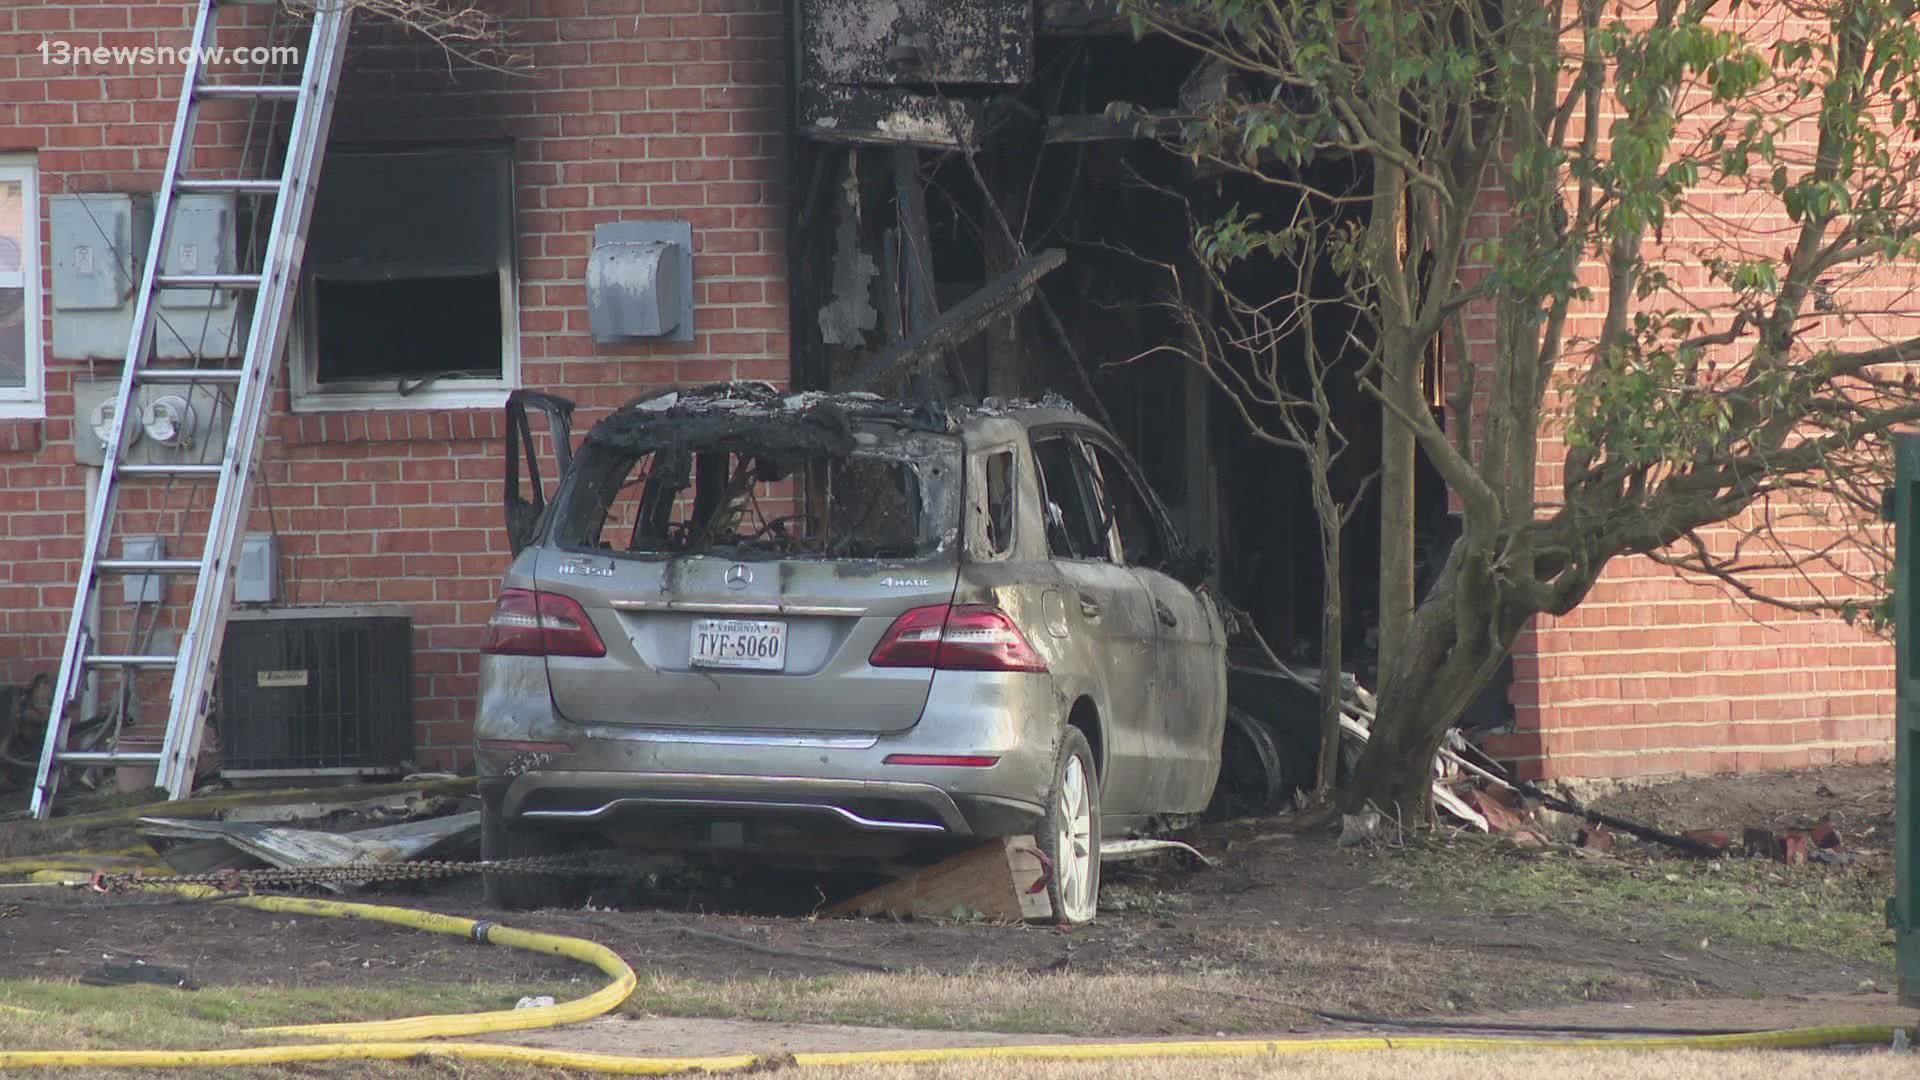 Police and firefighters responded to a townhouse in Virginia Beach after a car crashed into the building, causing it to catch fire.